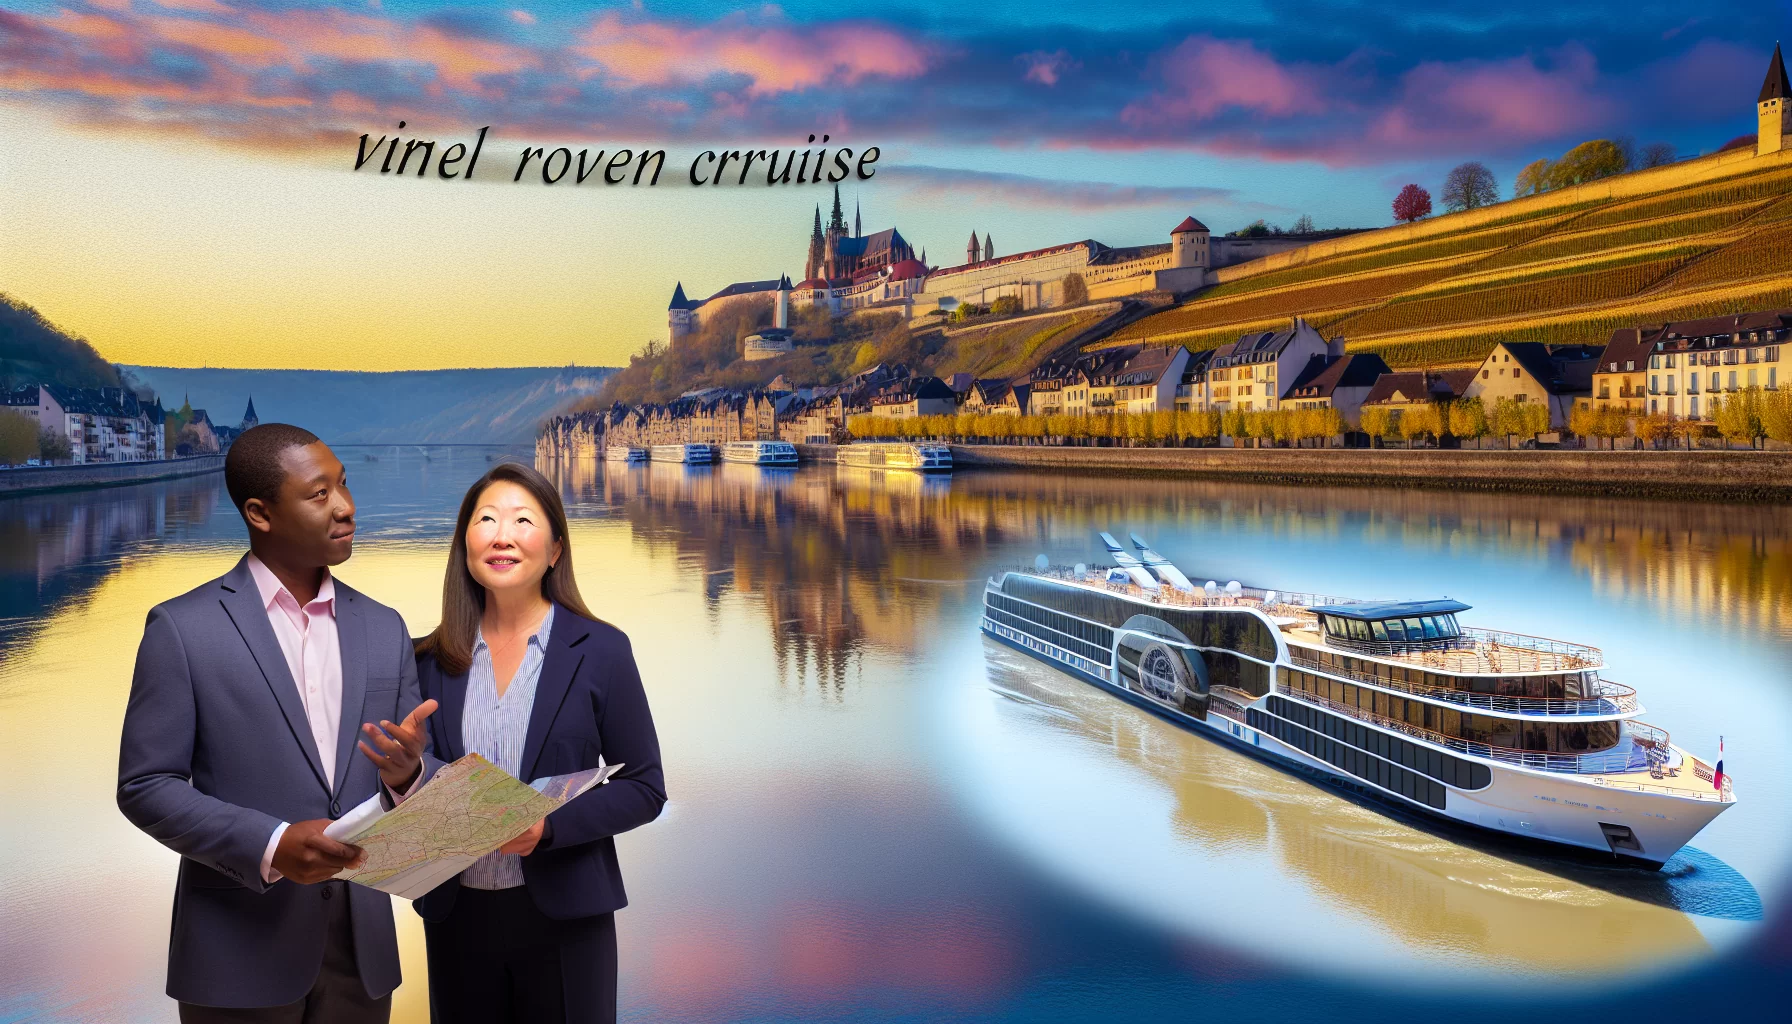 Riviera river cruises offers chance to win enchanting European voyage for travel advisors